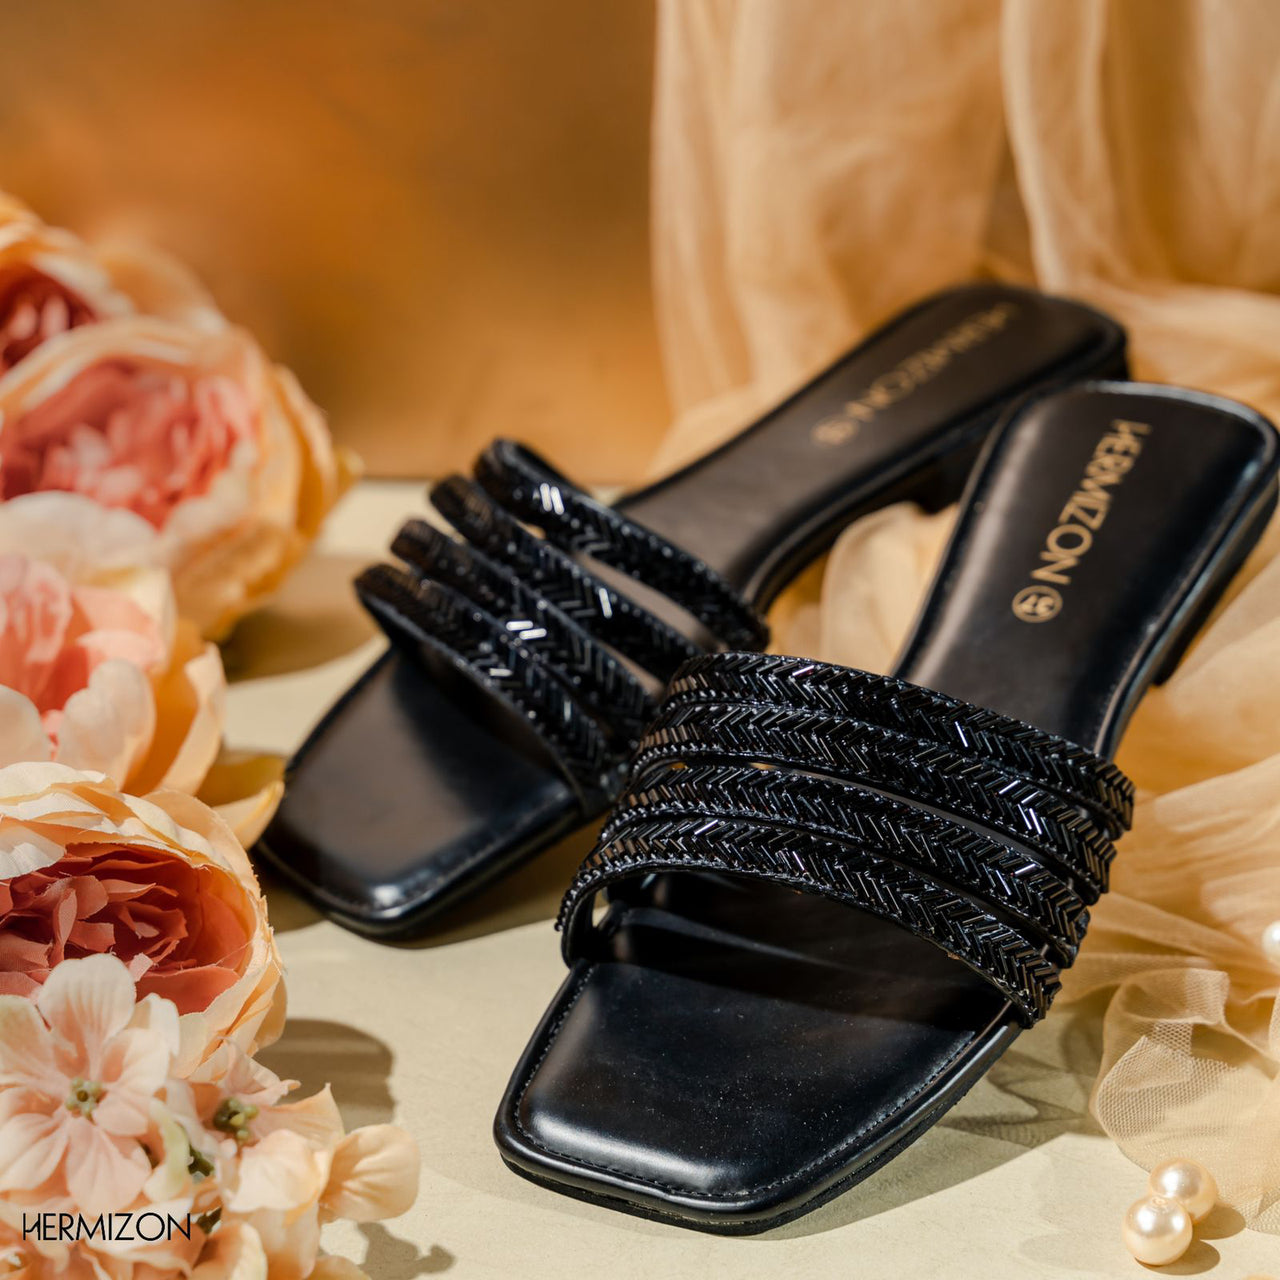 A black color flat sandals from Hermizon brand 